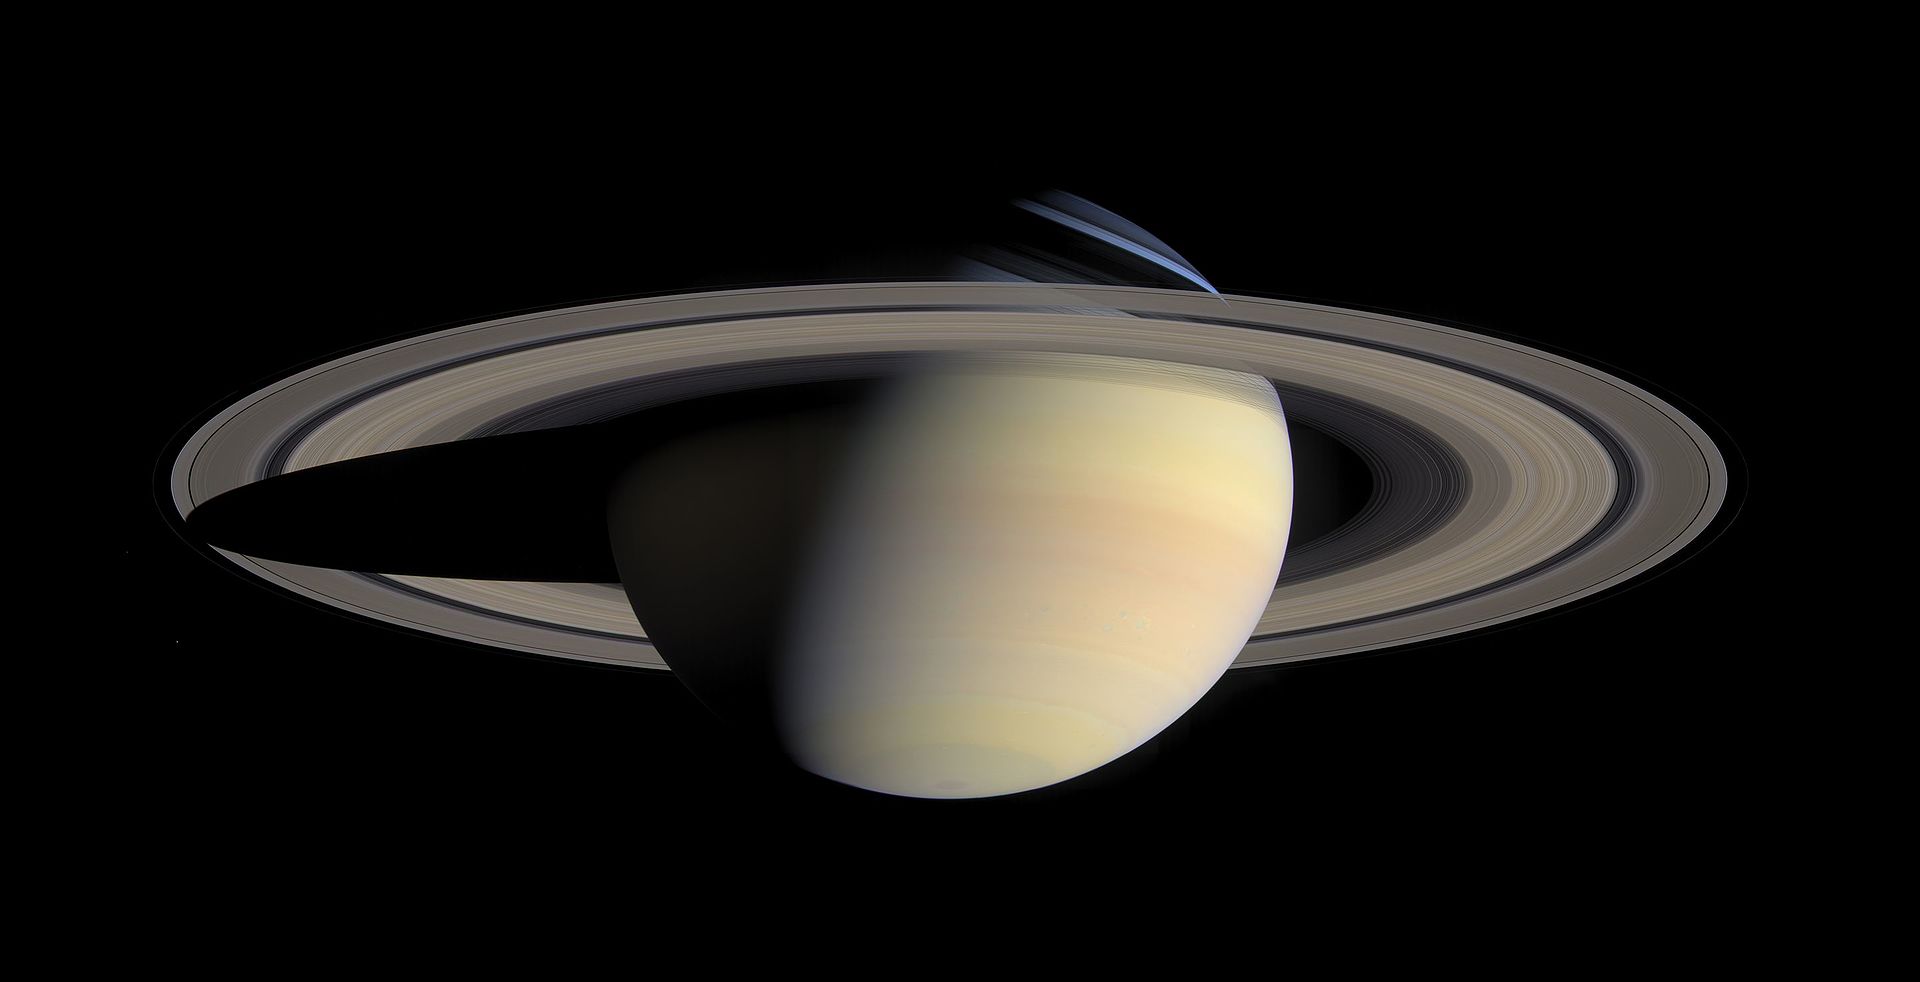 taa56b6d9d 1920px Saturn from Cassini Or